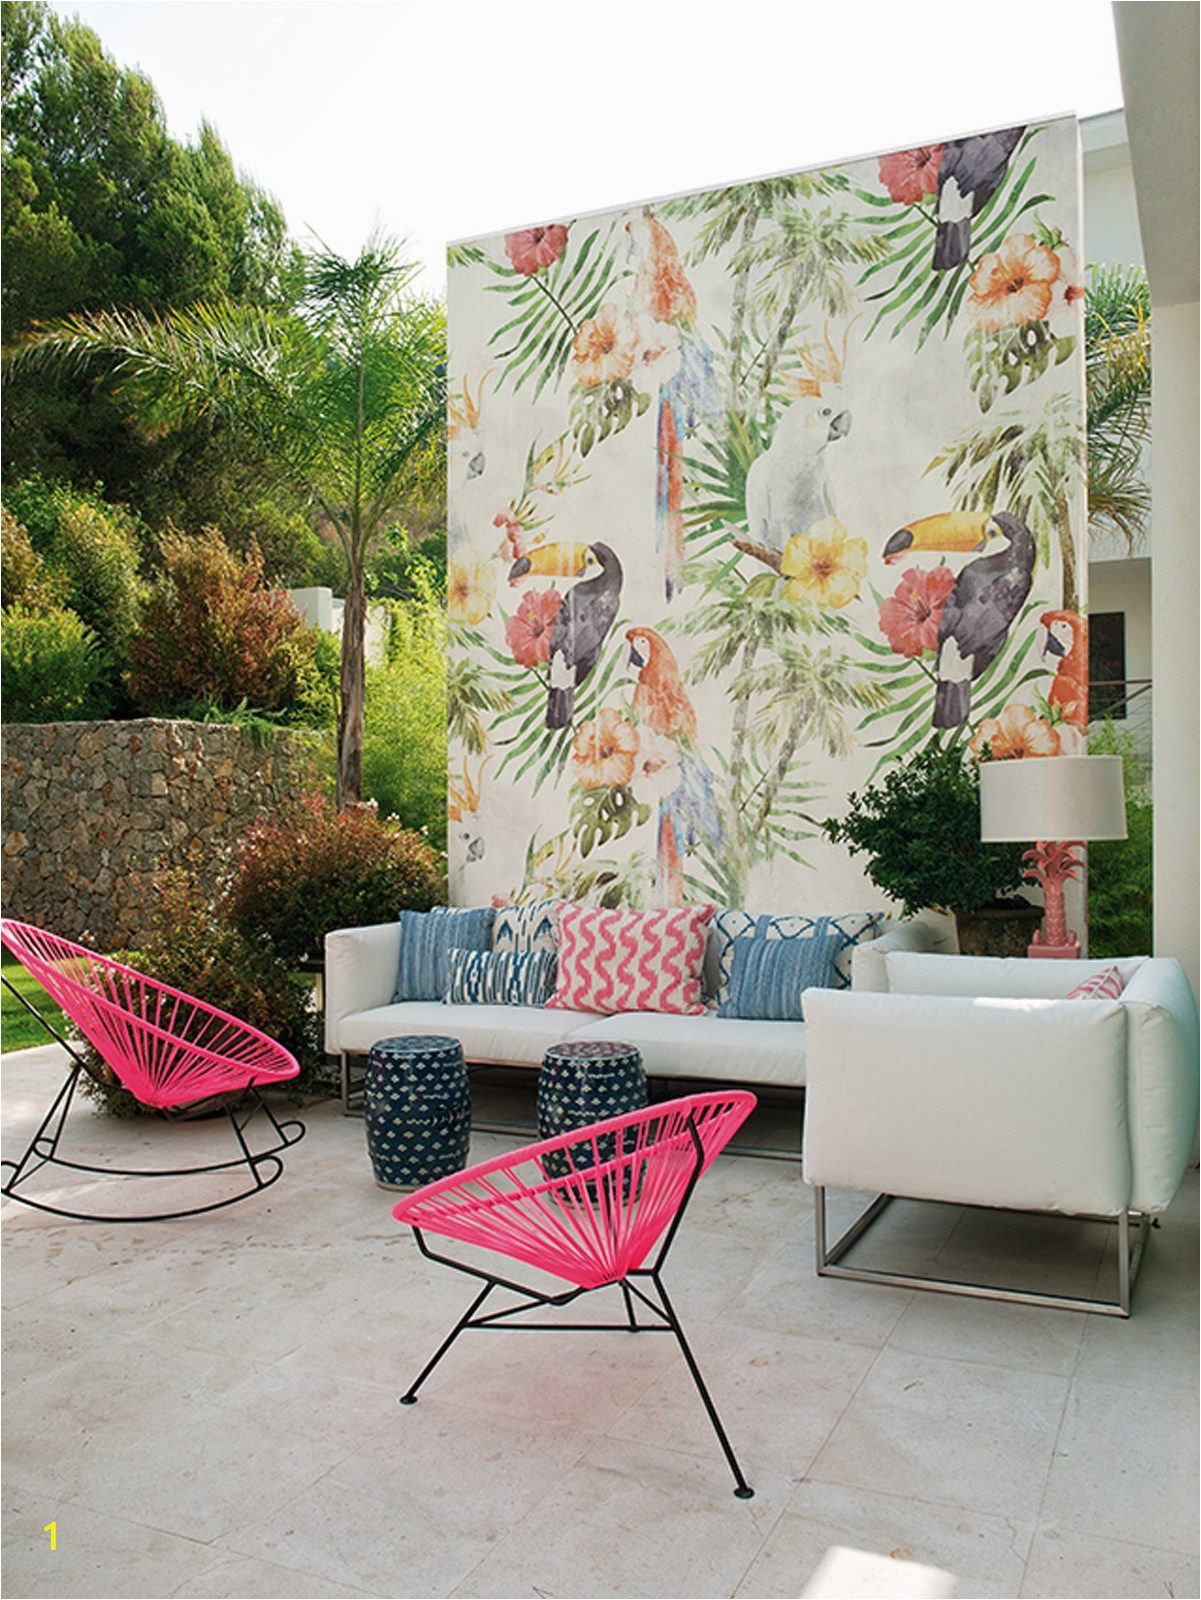 External Garden Wall Murals Wall&dec² at Made Expo Essential Wallpaper Style Colors